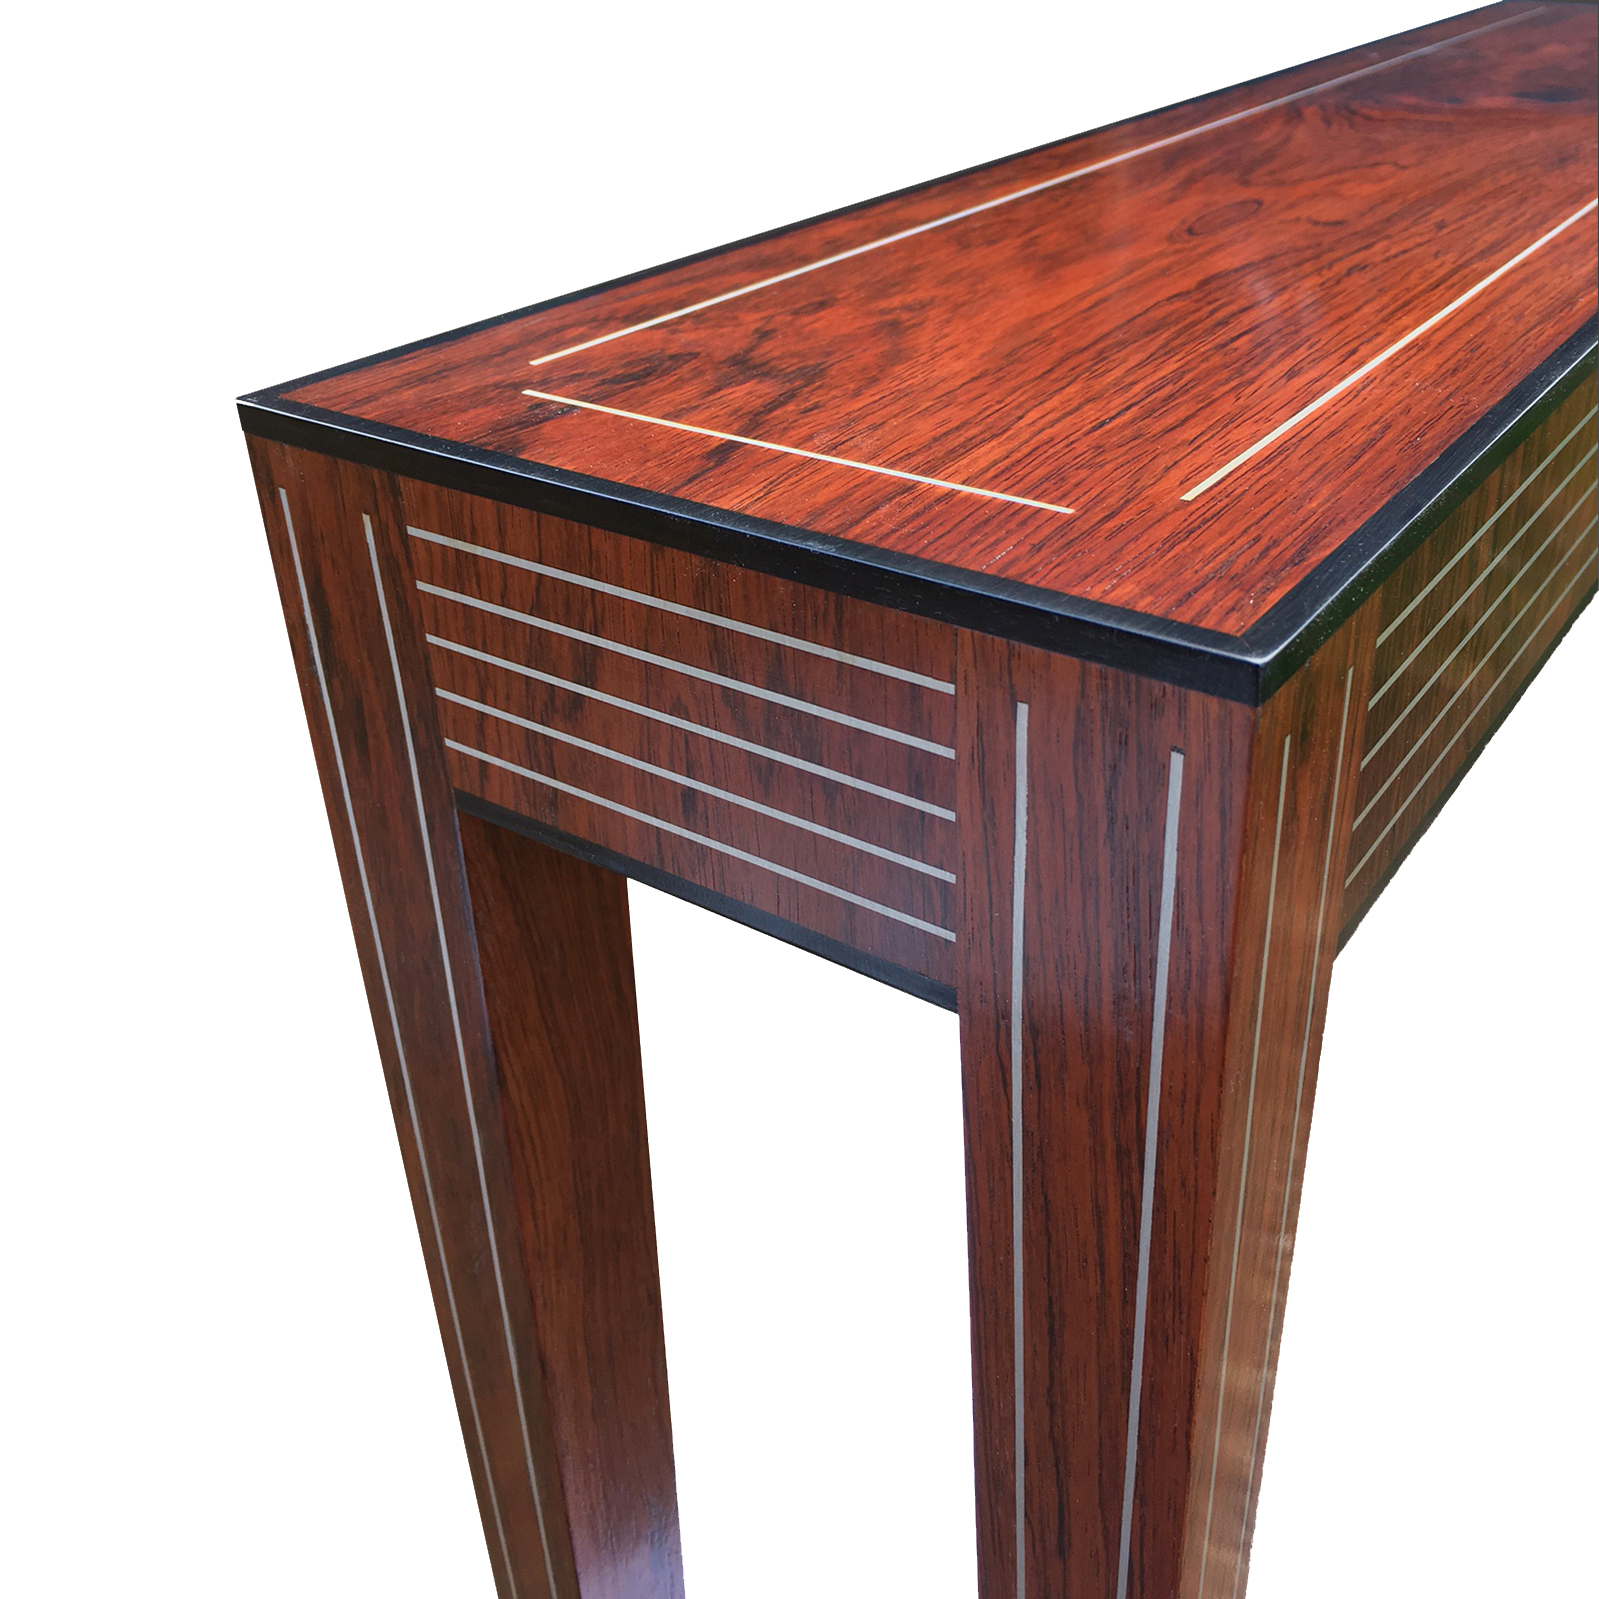 Brecon table. Made to order by Perceval Designs